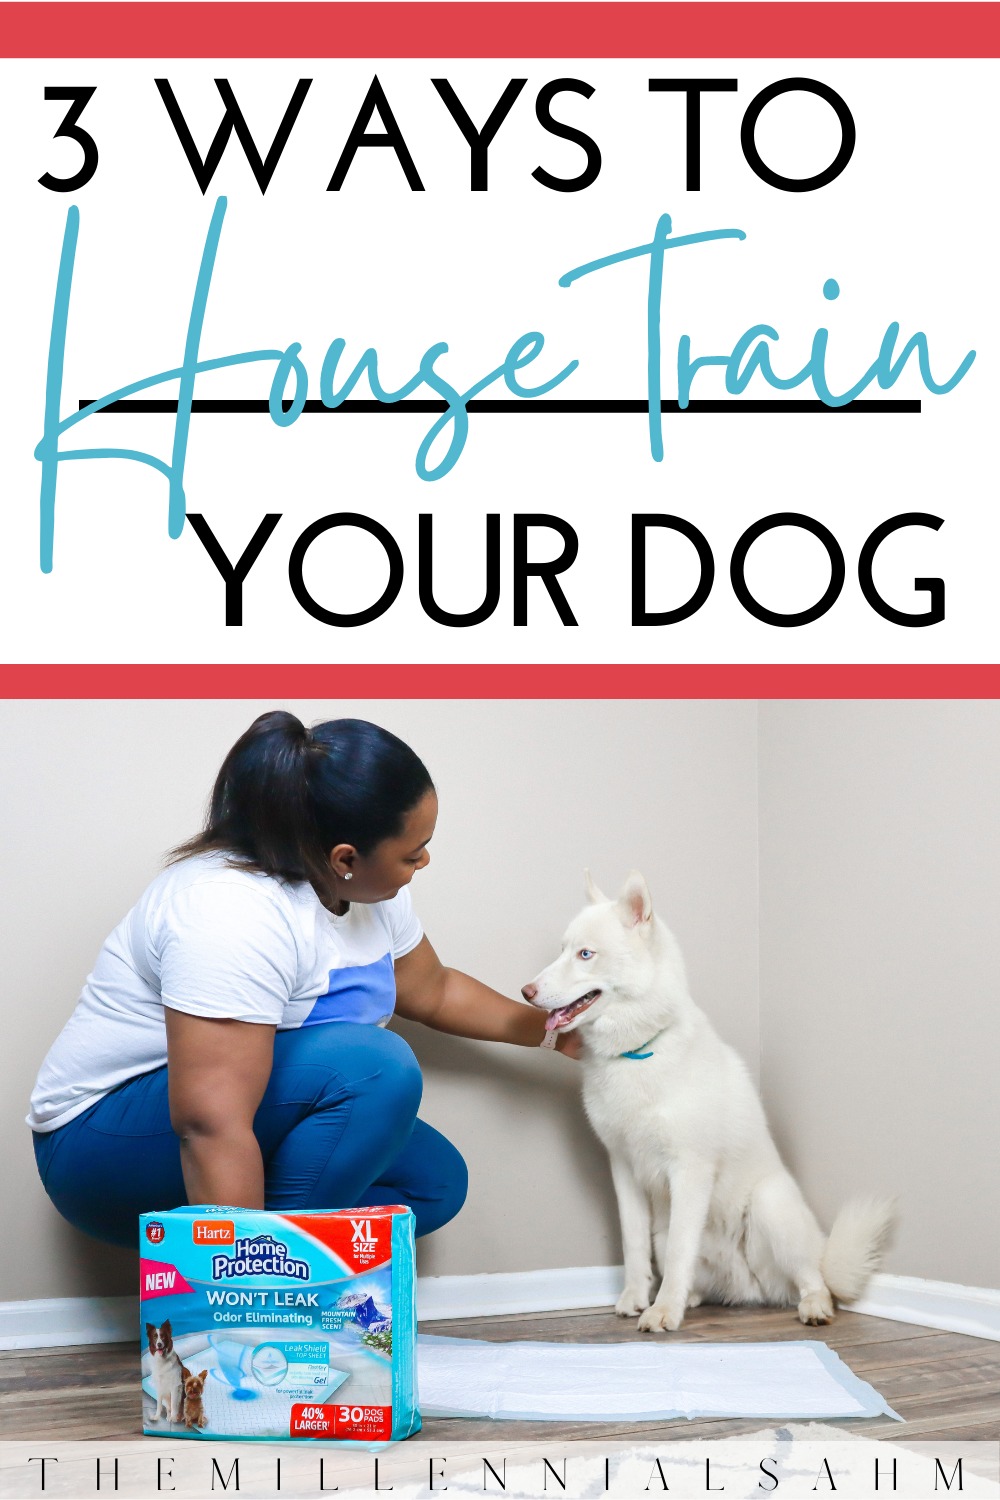 So whether you have a new puppy or an older adult dog, these three tips will help you house train your dog in no time.